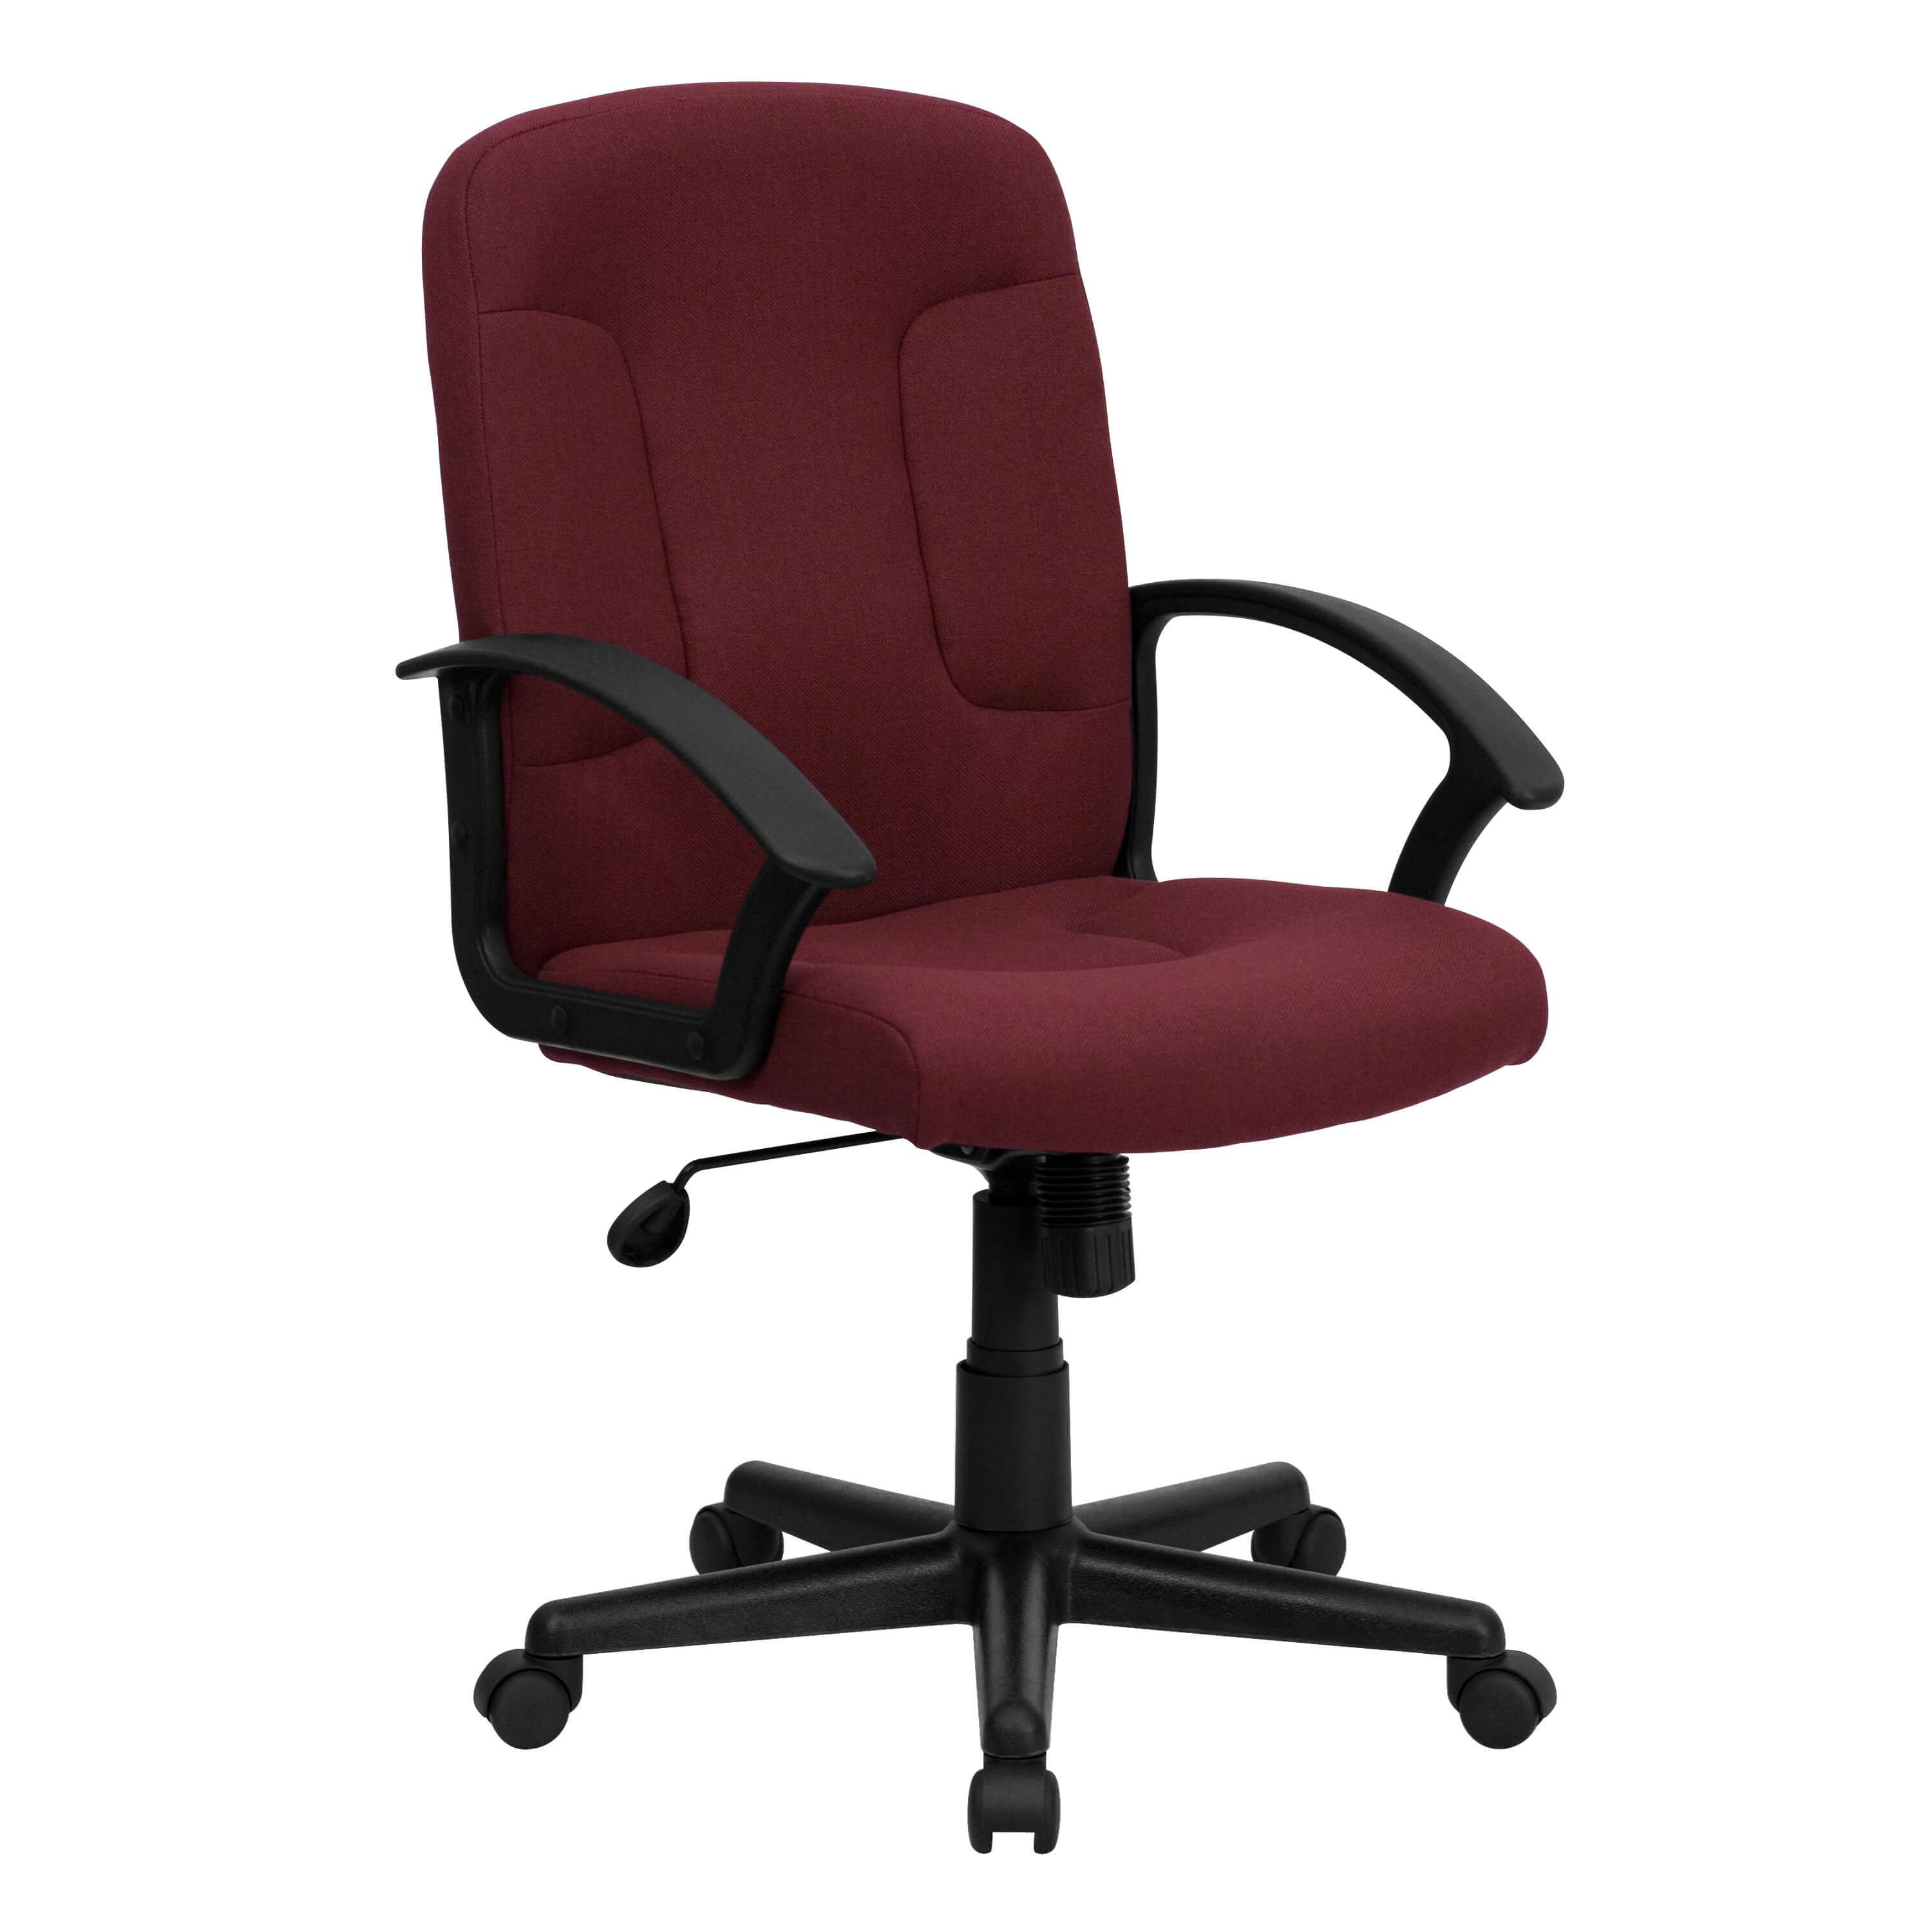 cool-office-chairs-upholstered-desk-chair.jpg